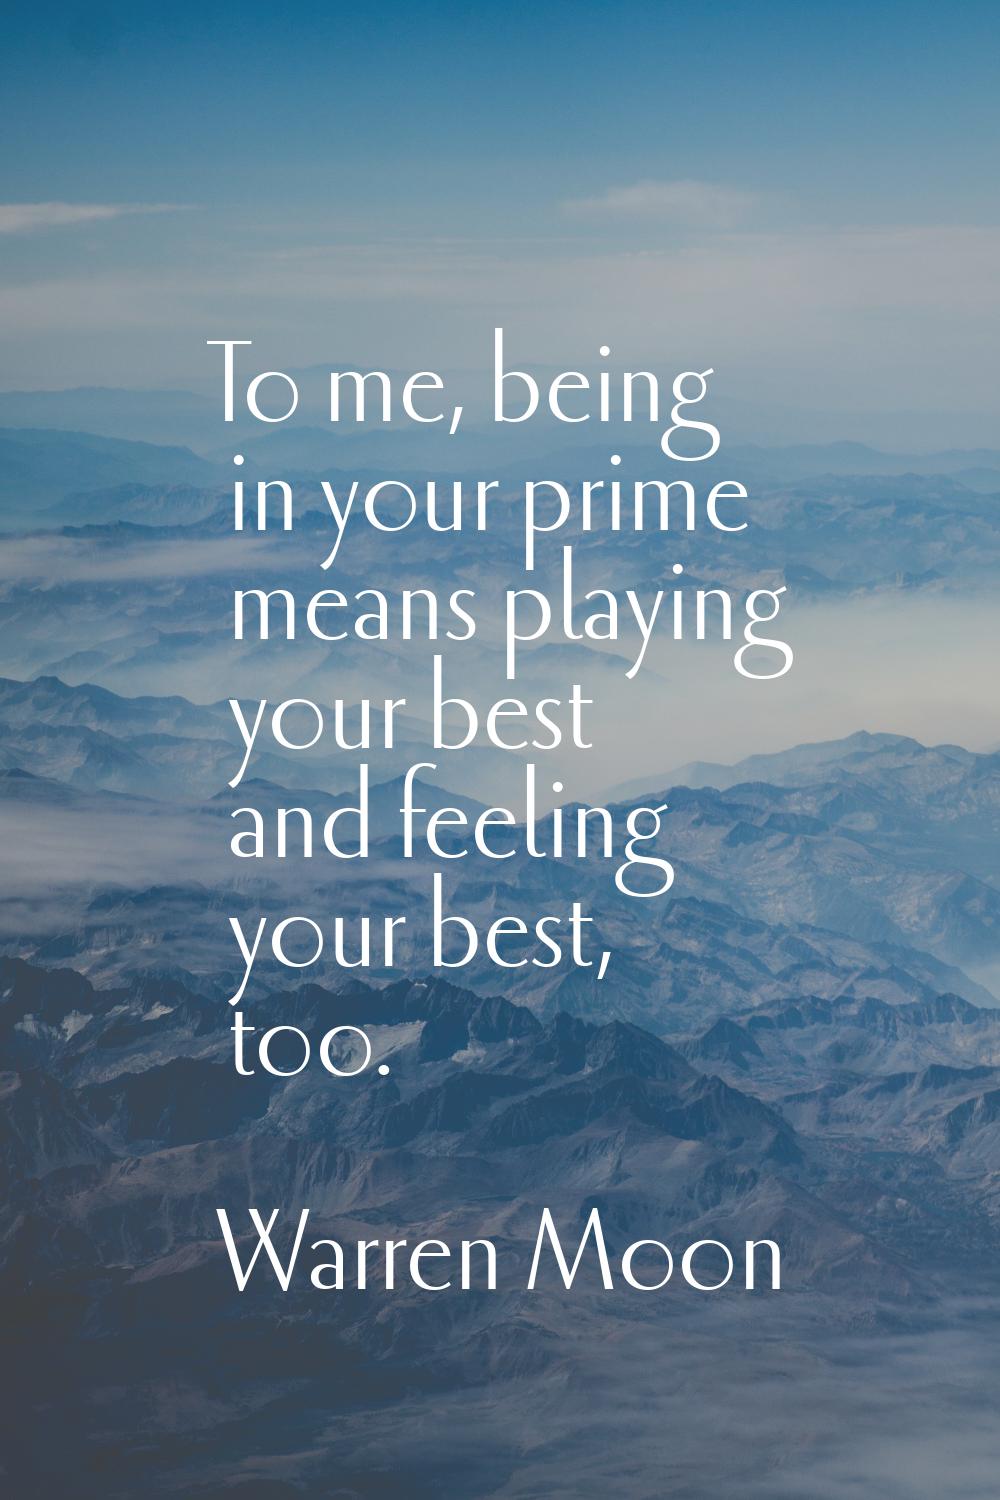 To me, being in your prime means playing your best and feeling your best, too.